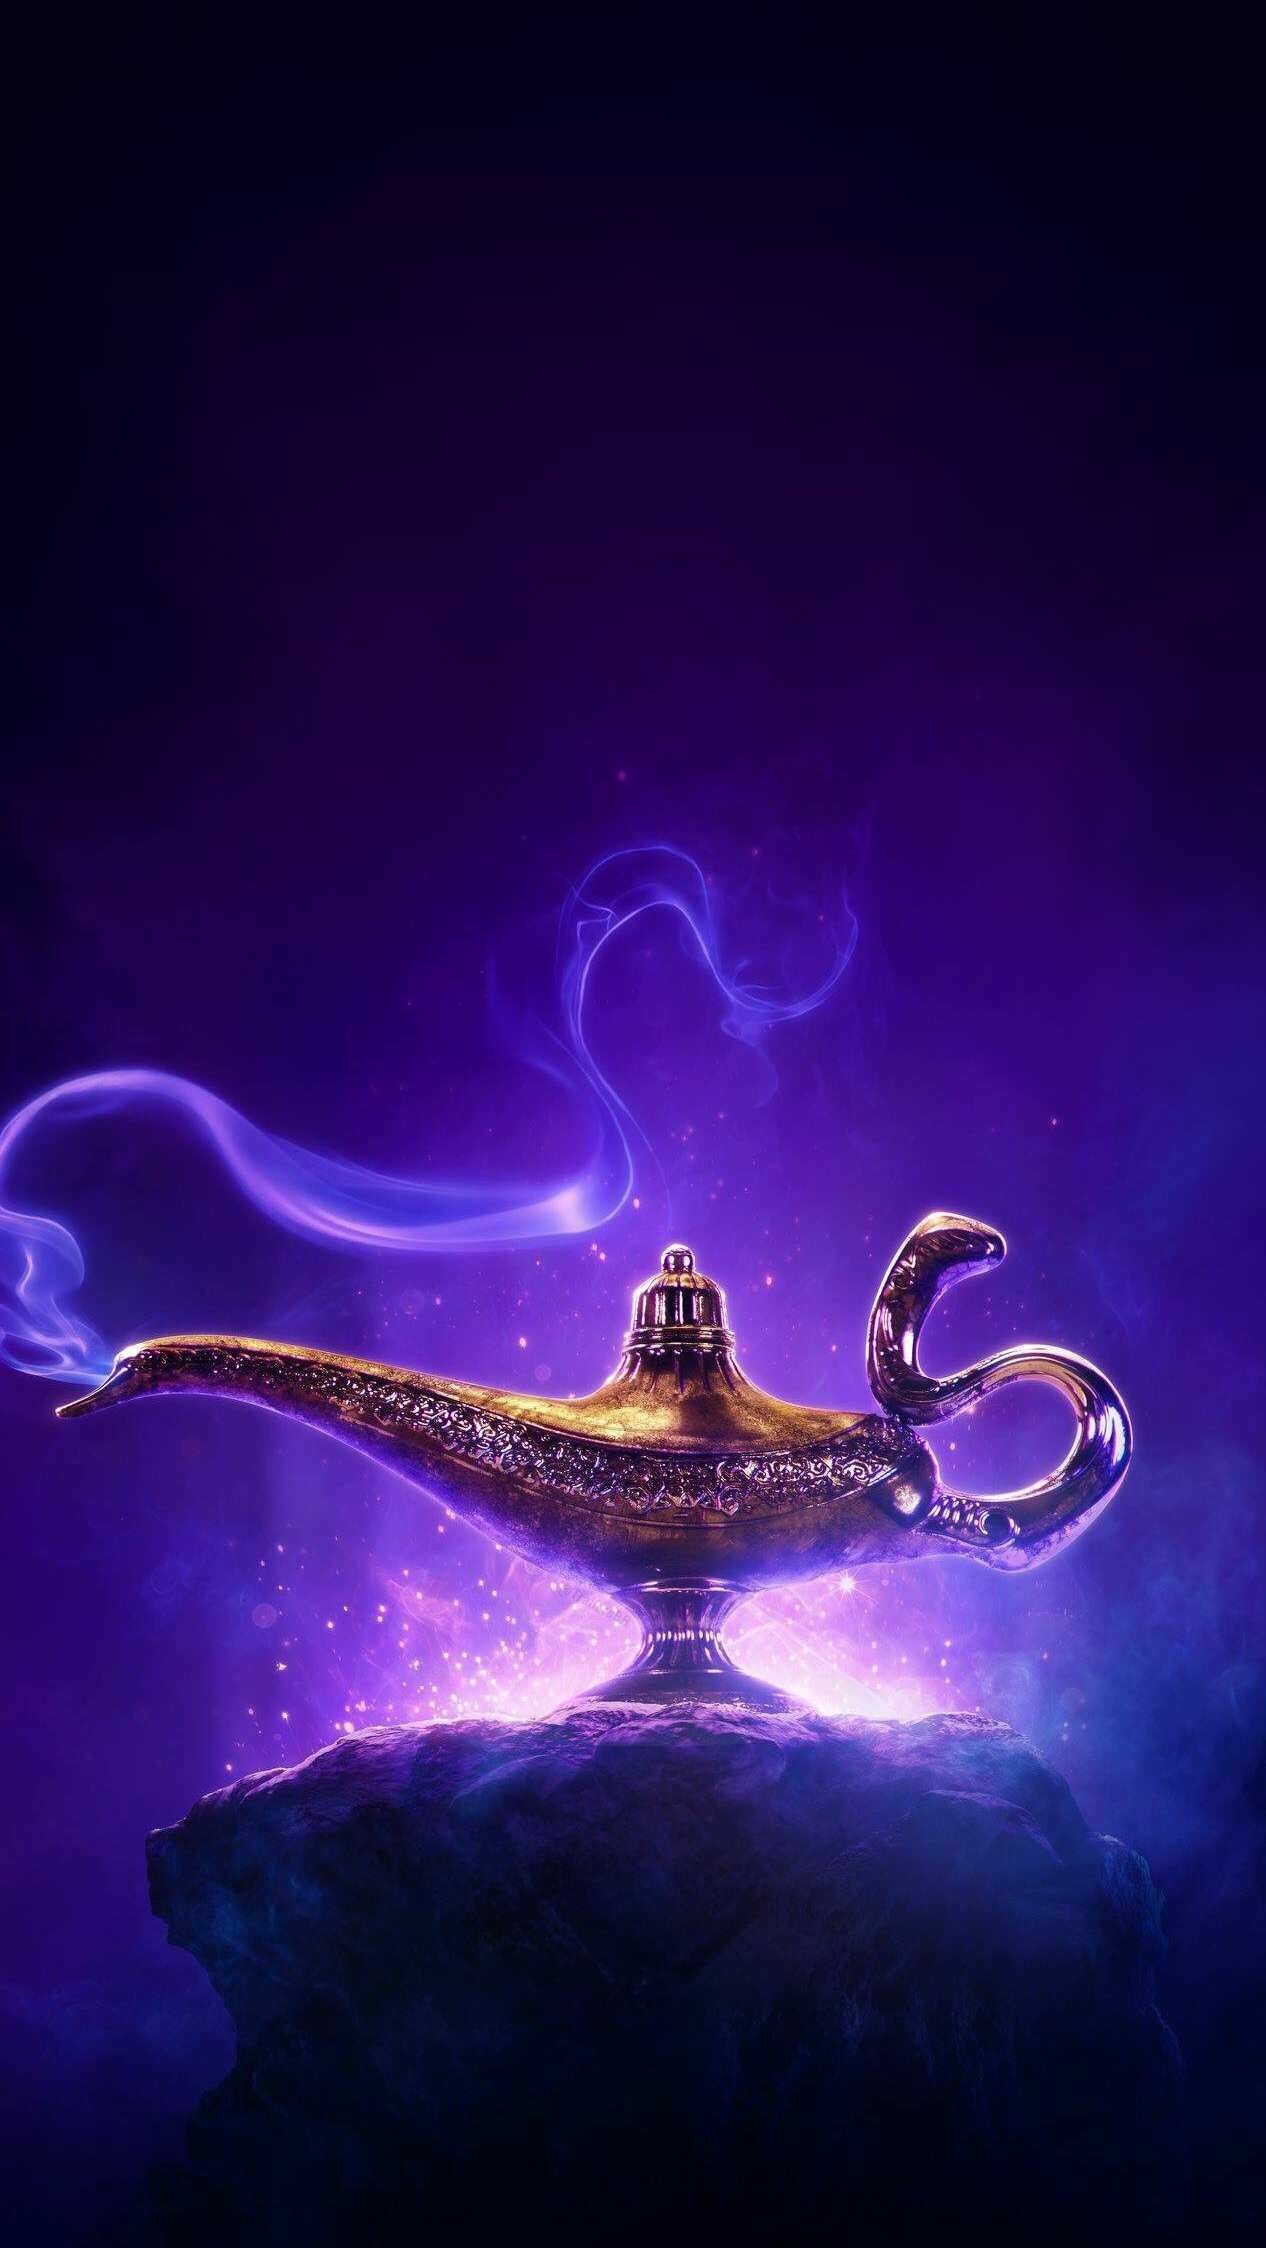 Aladdin (Cartoon): For the scenery design, various architectural elements seen in 19th-century orientalist paintings and photographs of the Arab world were used for guidance. 1270x2250 HD Wallpaper.